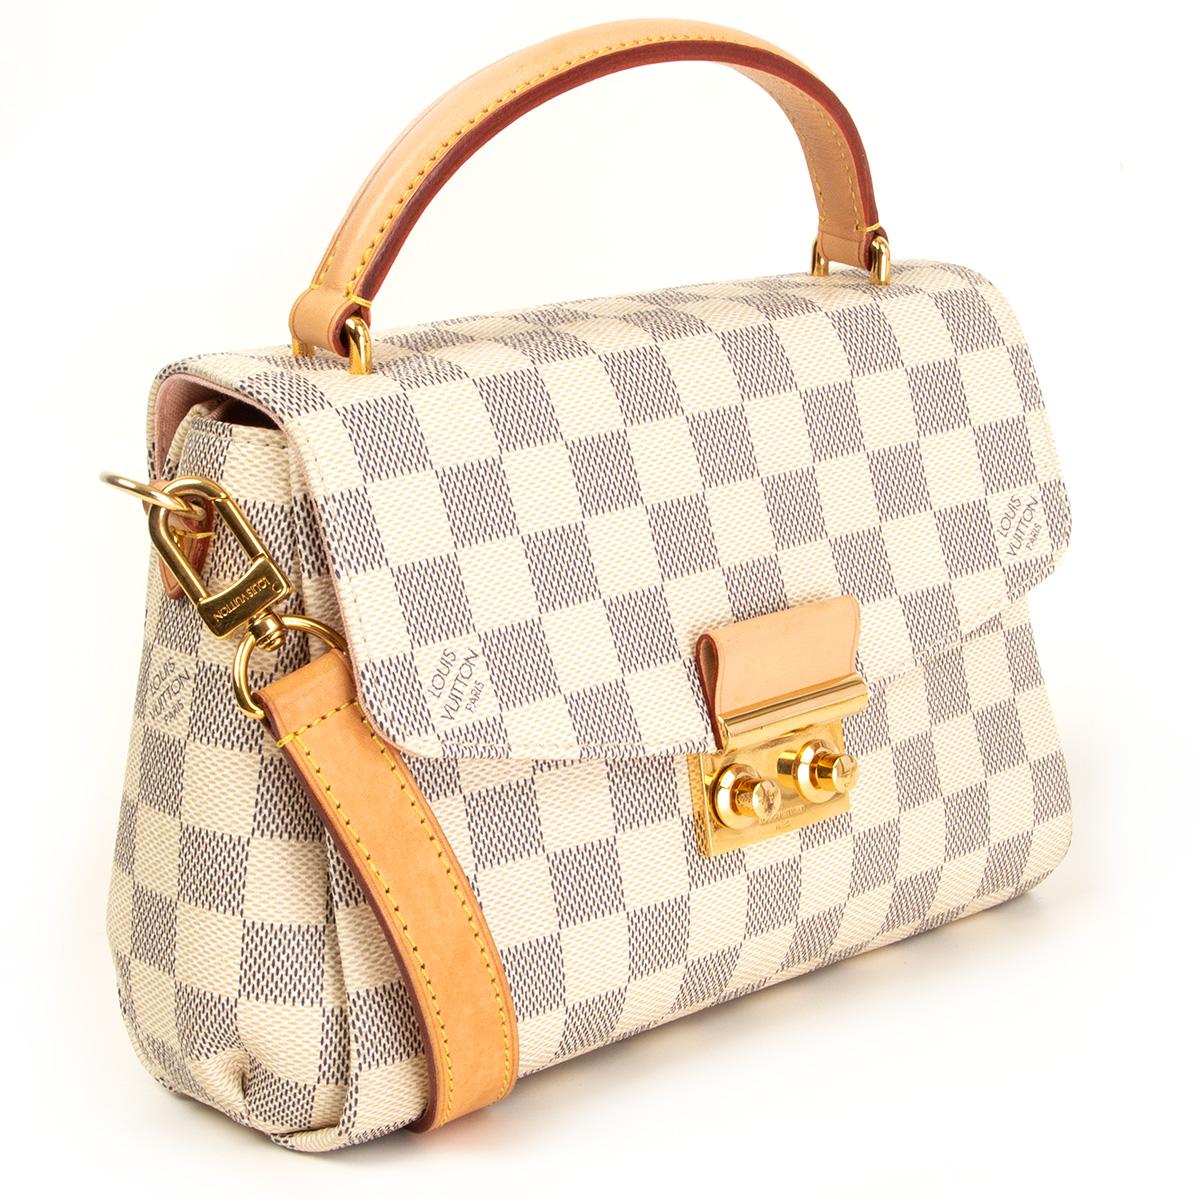 100% authentic Louis Vuitton Croisette crossbody bag in white Damier Azur canvas with natural leather top handle and adjustable and detachable shoulder strap. Closes with a lock on the front. Lined in pink alcantara with an open pocket against the